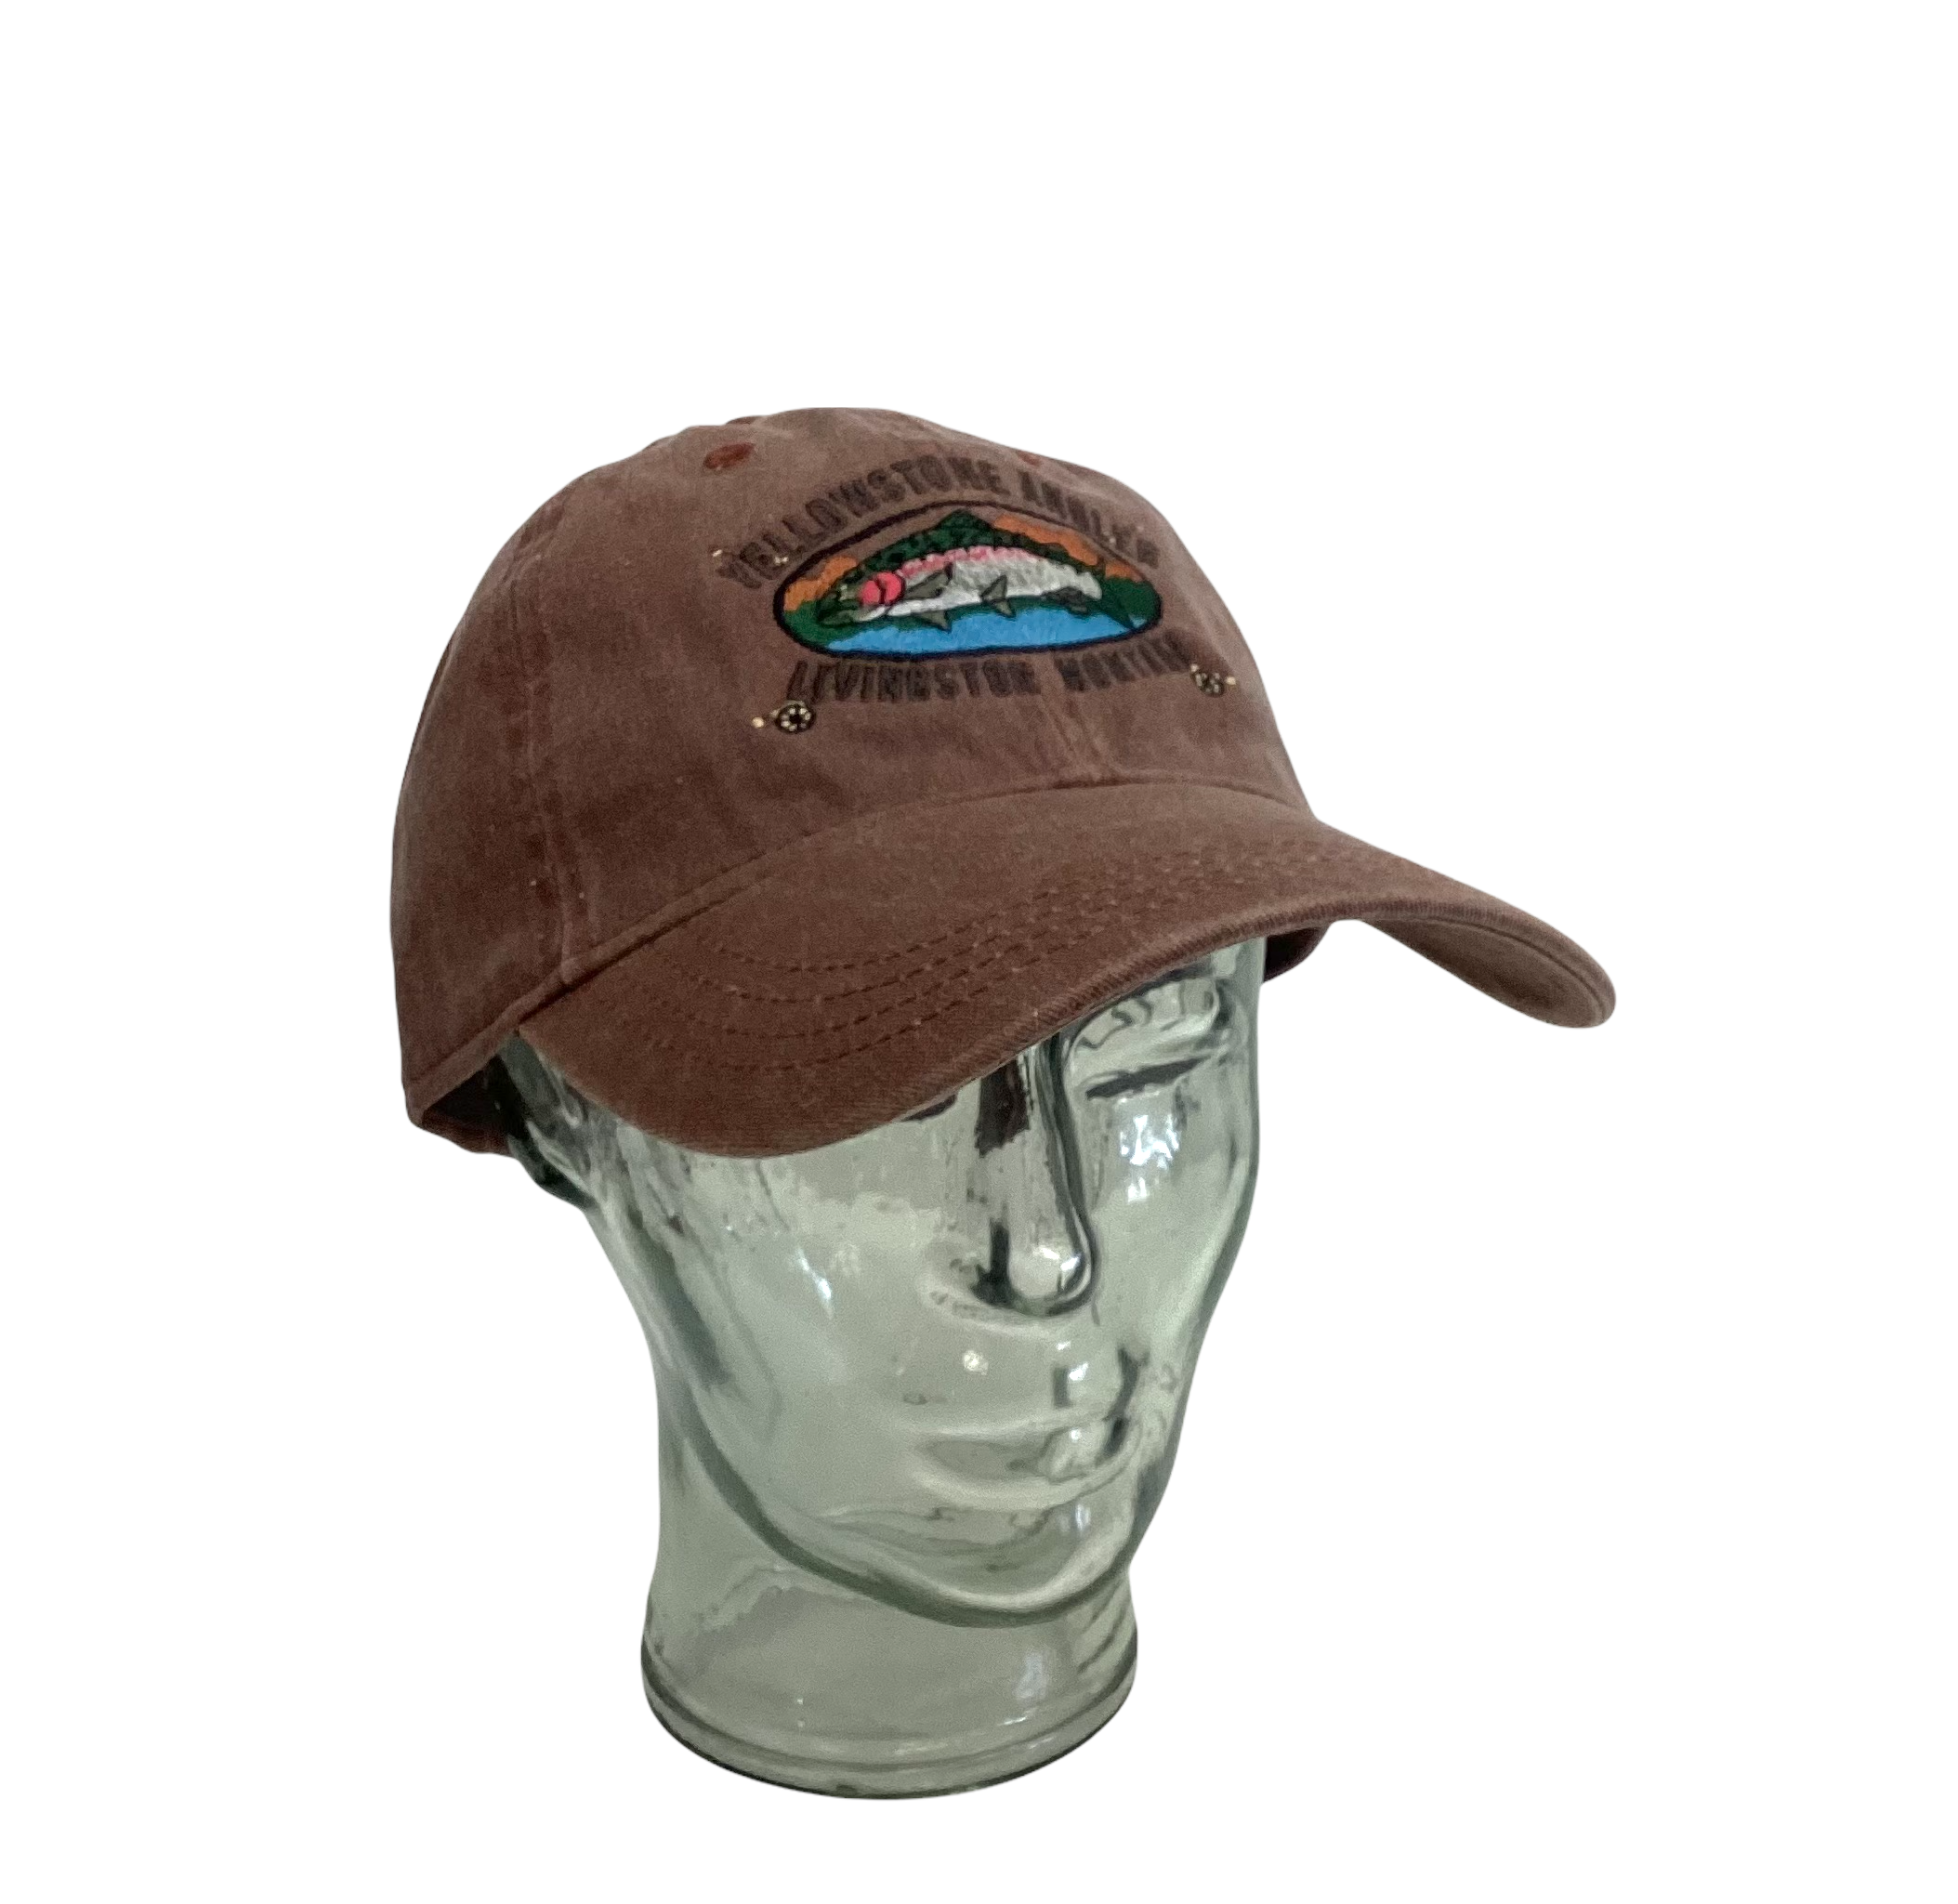 https://www.yellowstoneangler.com/wp-content/uploads/2022/03/Sepia-Canyon-Hat.png